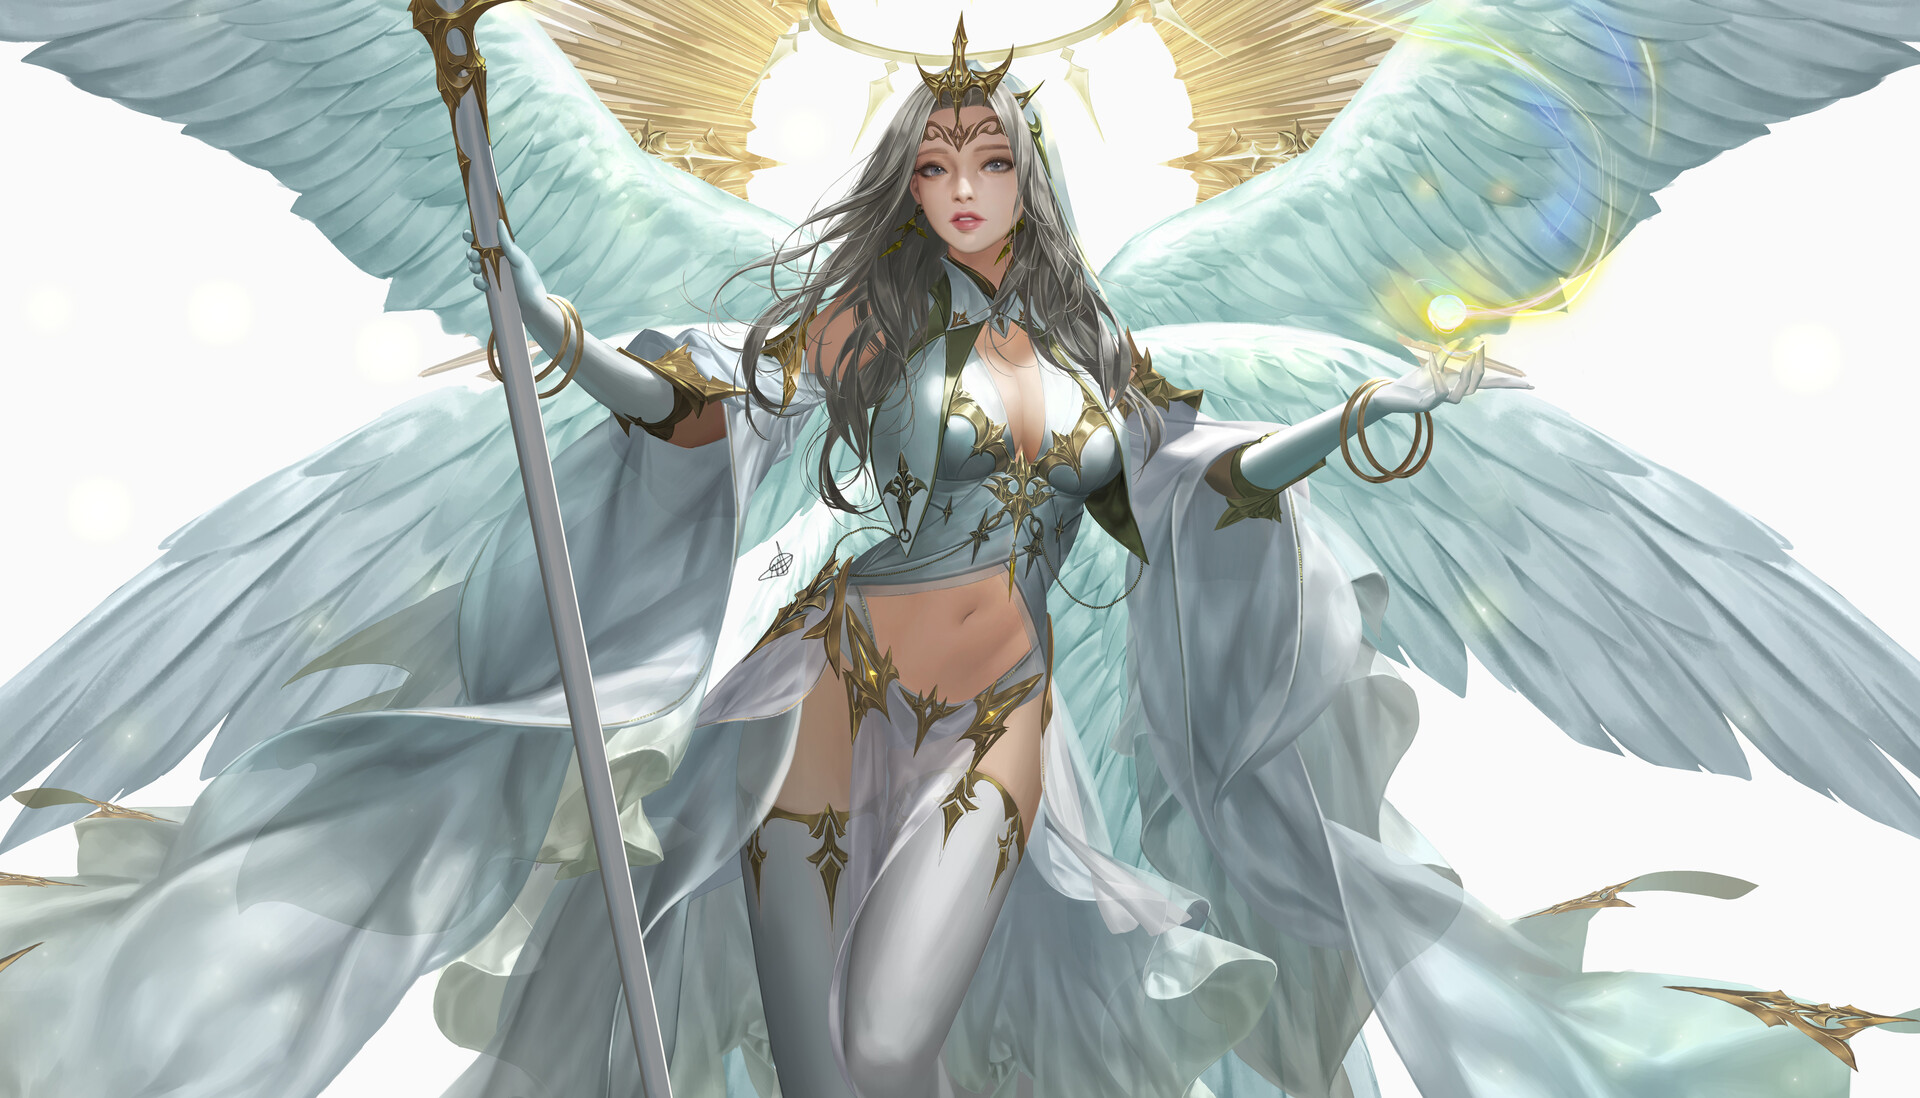 General 1920x1098 Daeho Cha drawing women crown angel dress white clothing see-through clothing feathers spell fantasy art